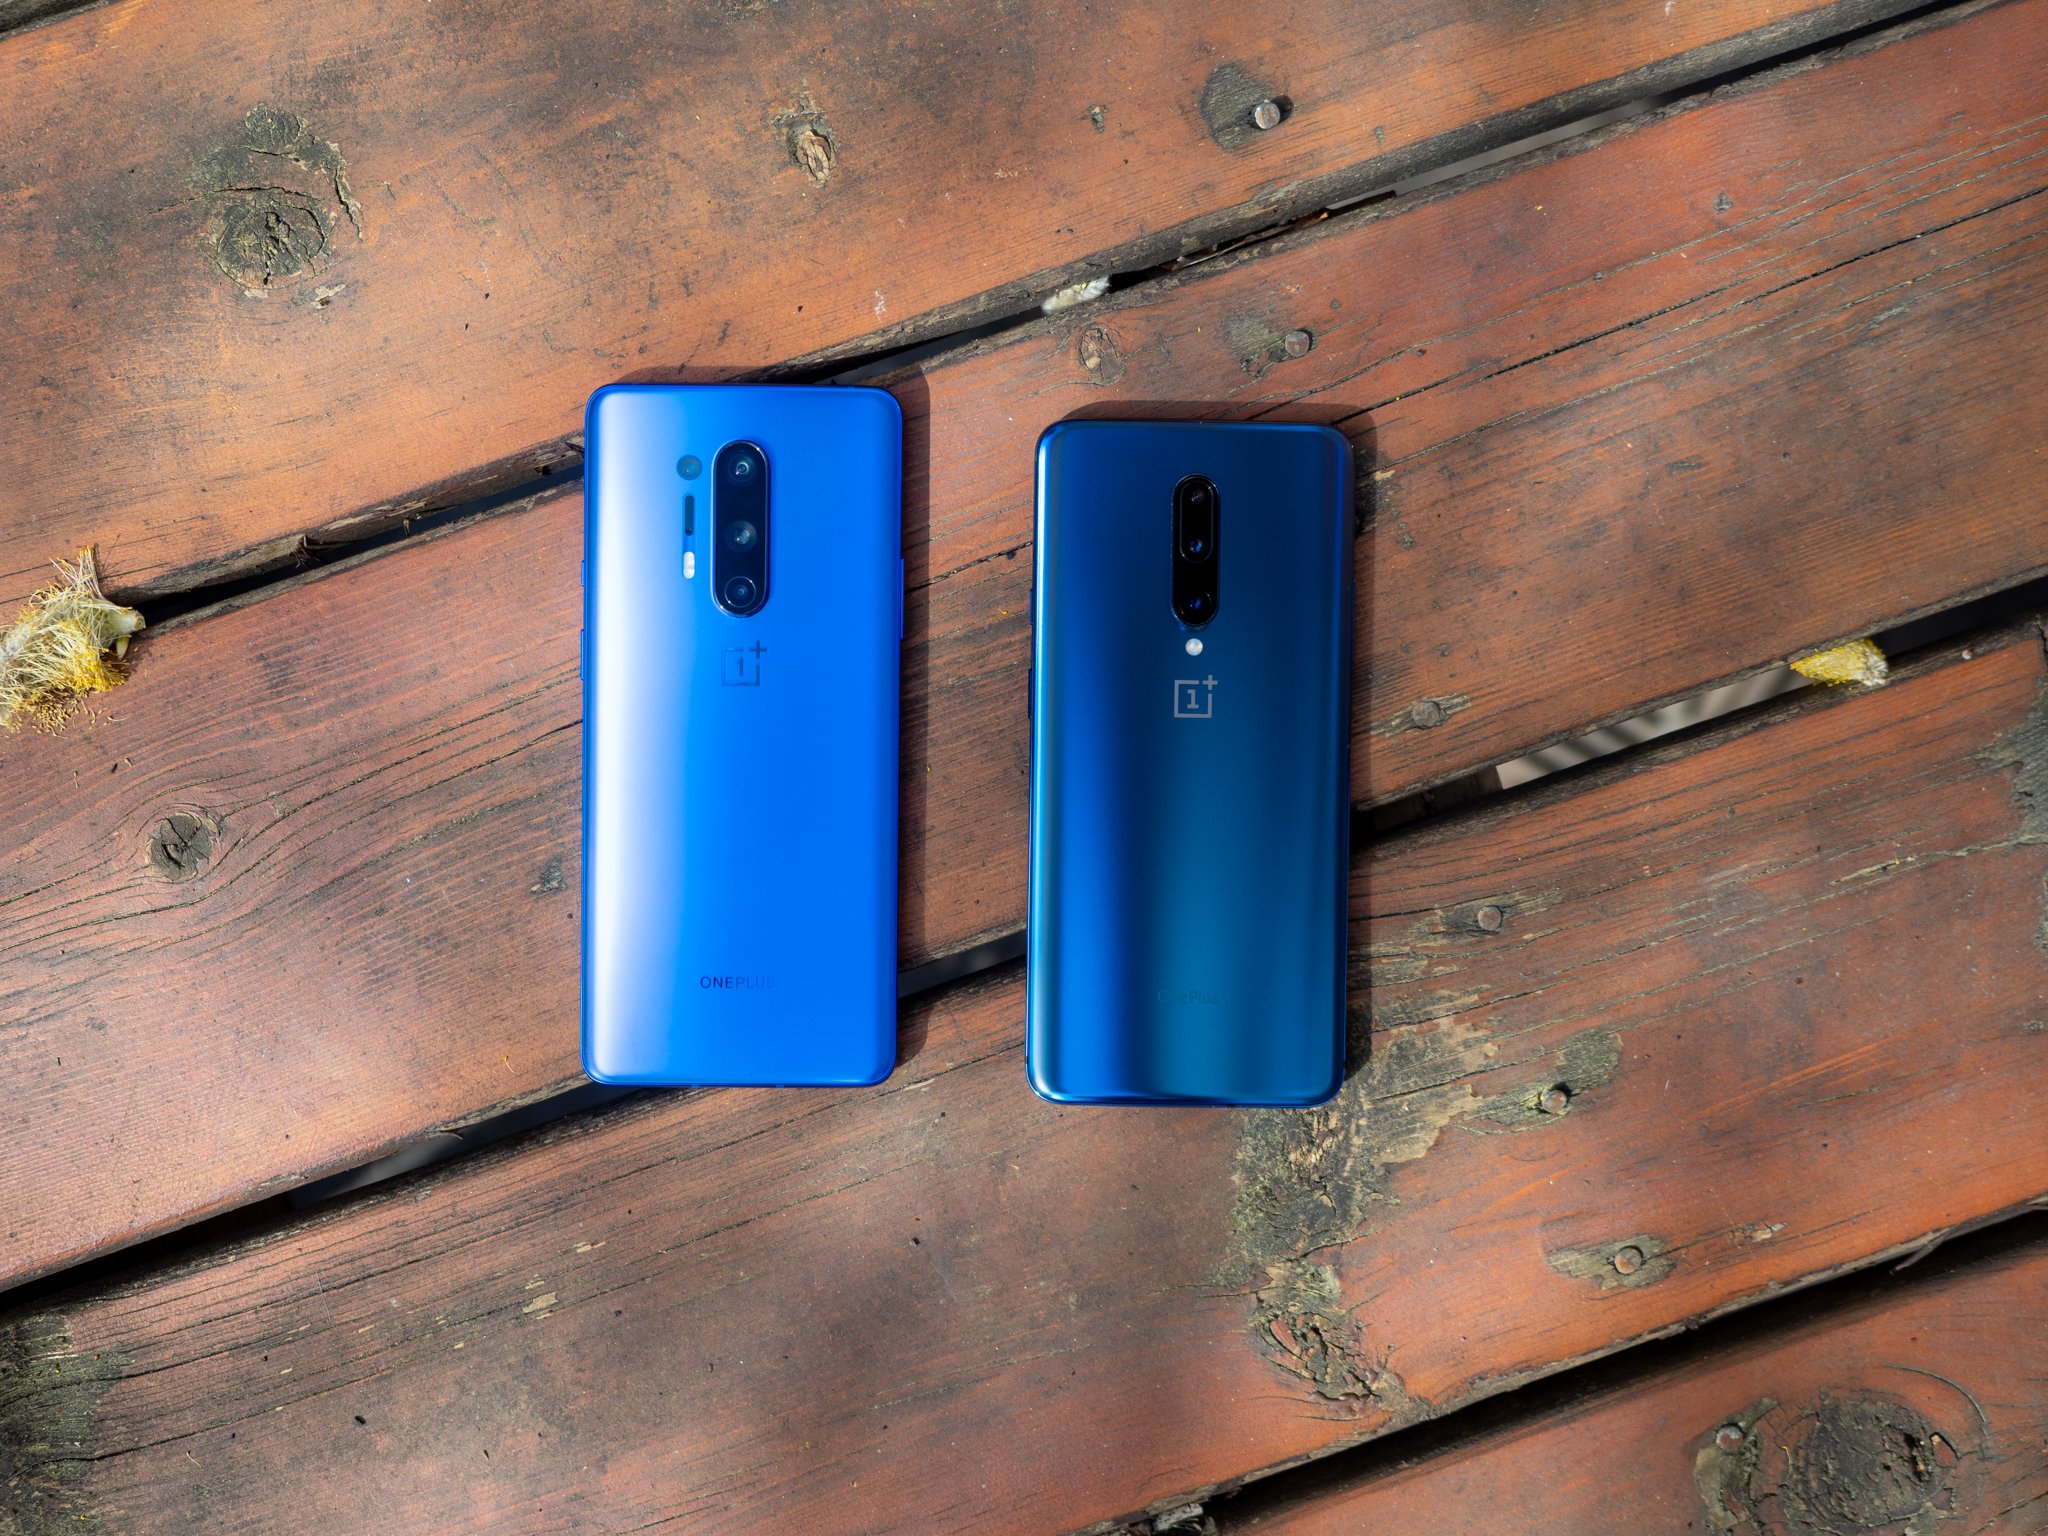 Oneplus 8 Pro Review